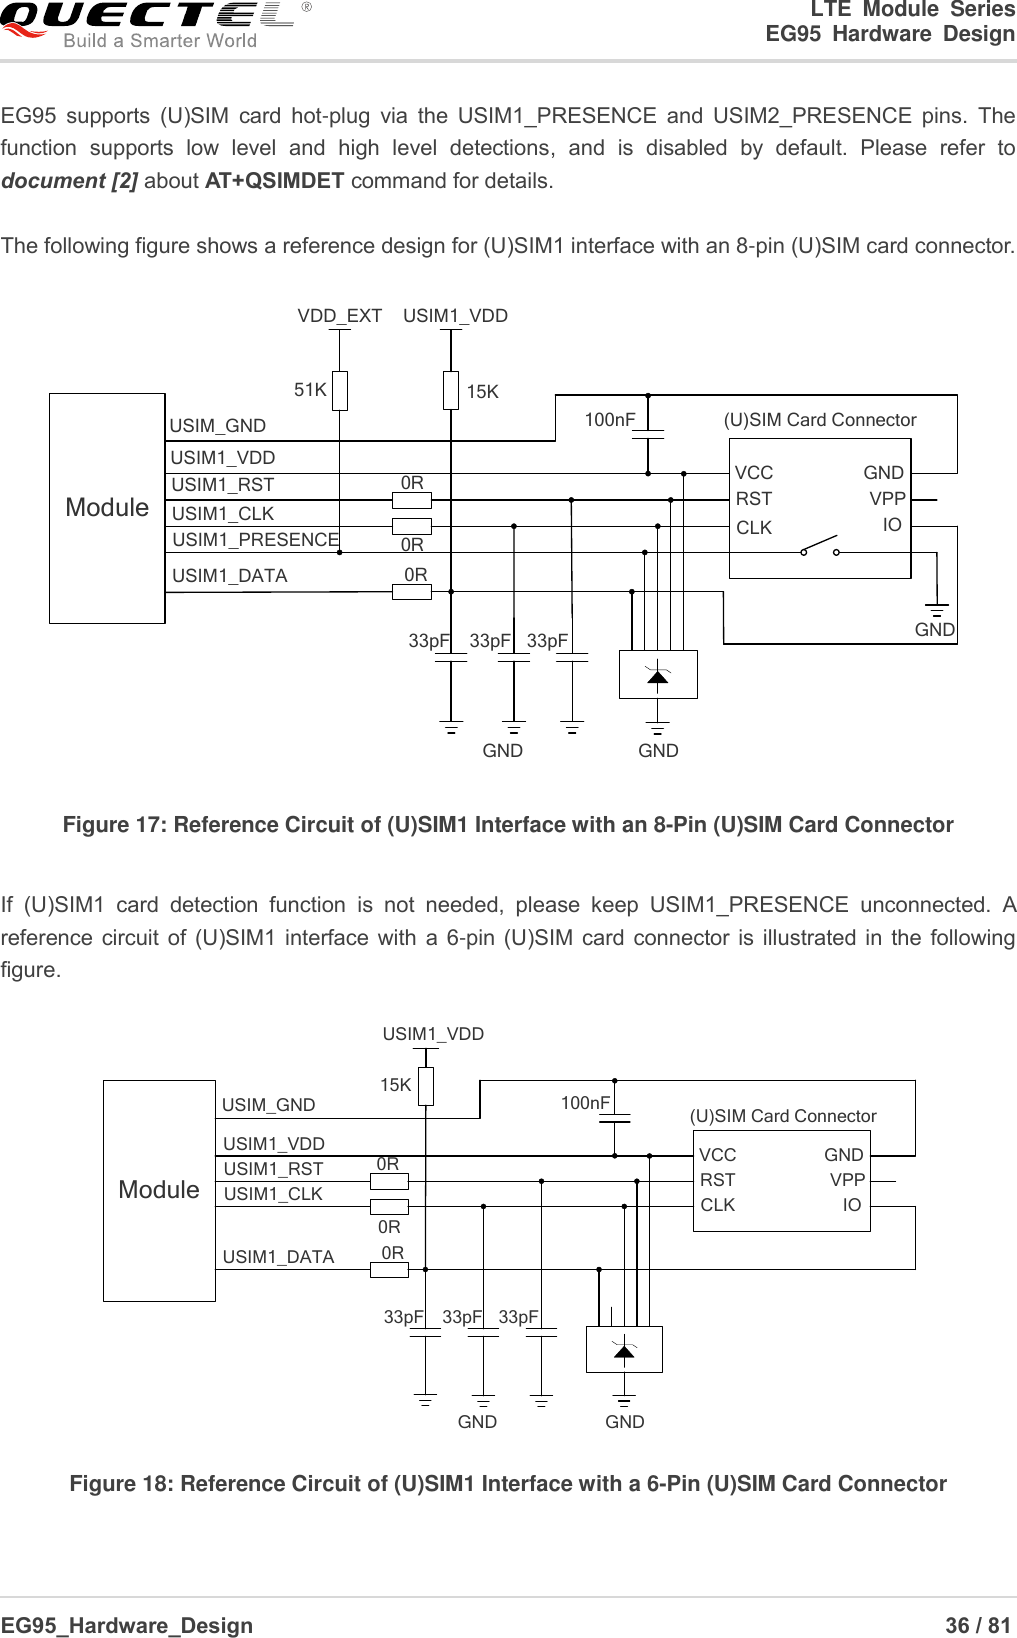 LTE  Module  Series                                                  EG95  Hardware  Design  EG95_Hardware_Design                                                                   36 / 81    EG95  supports  (U)SIM  card  hot-plug  via  the  USIM1_PRESENCE  and  USIM2_PRESENCE  pins.  The function  supports  low  level  and  high  level  detections,  and  is  disabled  by  default.  Please  refer  to document [2] about AT+QSIMDET command for details.  The following figure shows a reference design for (U)SIM1 interface with an 8-pin (U)SIM card connector. ModuleUSIM1_VDDUSIM_GNDUSIM1_RSTUSIM1_CLKUSIM1_DATAUSIM1_PRESENCE0R0R0RVDD_EXT51K100nF (U)SIM Card ConnectorGNDGND33pF 33pF 33pFVCCRSTCLK IOVPPGNDGNDUSIM1_VDD15K Figure 17: Reference Circuit of (U)SIM1 Interface with an 8-Pin (U)SIM Card Connector  If  (U)SIM1  card  detection  function  is  not  needed,  please  keep  USIM1_PRESENCE  unconnected.  A reference circuit of  (U)SIM1  interface with  a 6-pin  (U)SIM card connector is  illustrated in  the  following figure. ModuleUSIM1_VDDUSIM_GNDUSIM1_RSTUSIM1_CLKUSIM1_DATA 0R0R0R100nF (U)SIM Card ConnectorGND33pF 33pF 33pFVCCRSTCLK IOVPPGNDGND15KUSIM1_VDD Figure 18: Reference Circuit of (U)SIM1 Interface with a 6-Pin (U)SIM Card Connector  